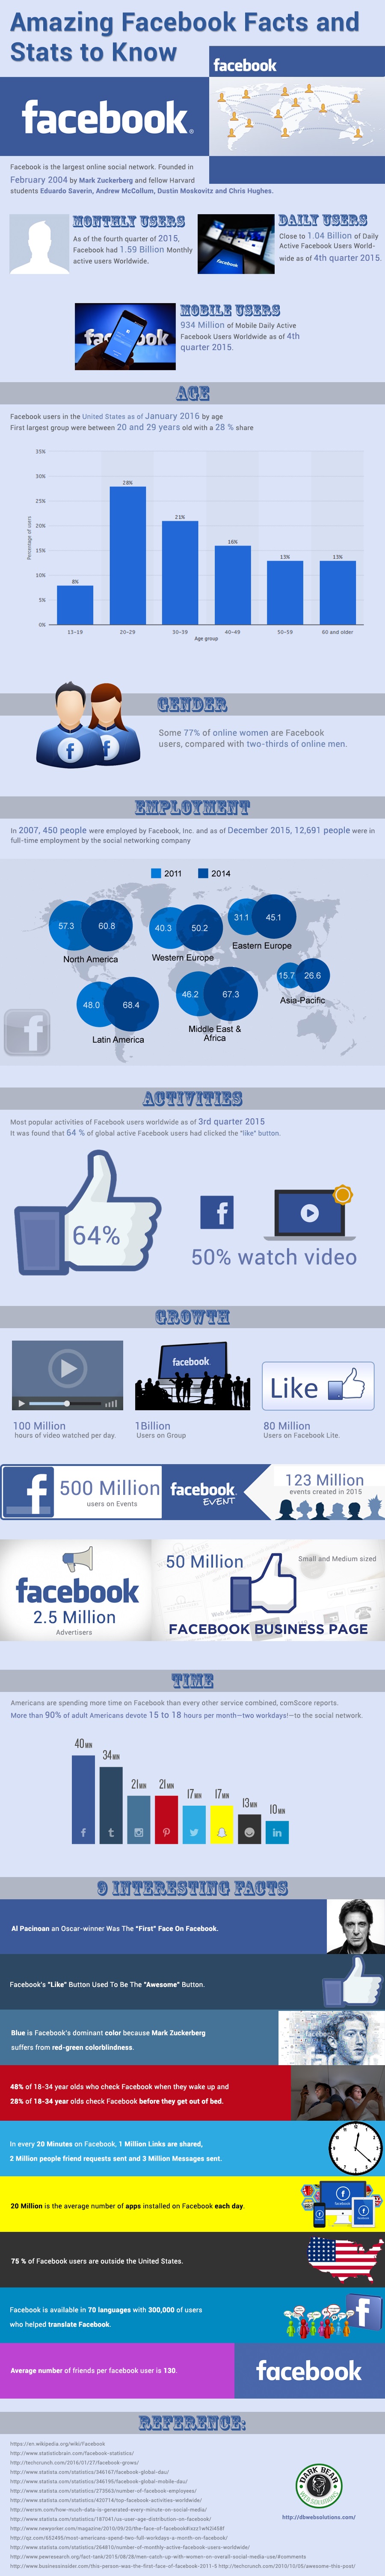 Amazing Facebook Facts and Stats to Know - An Infographic